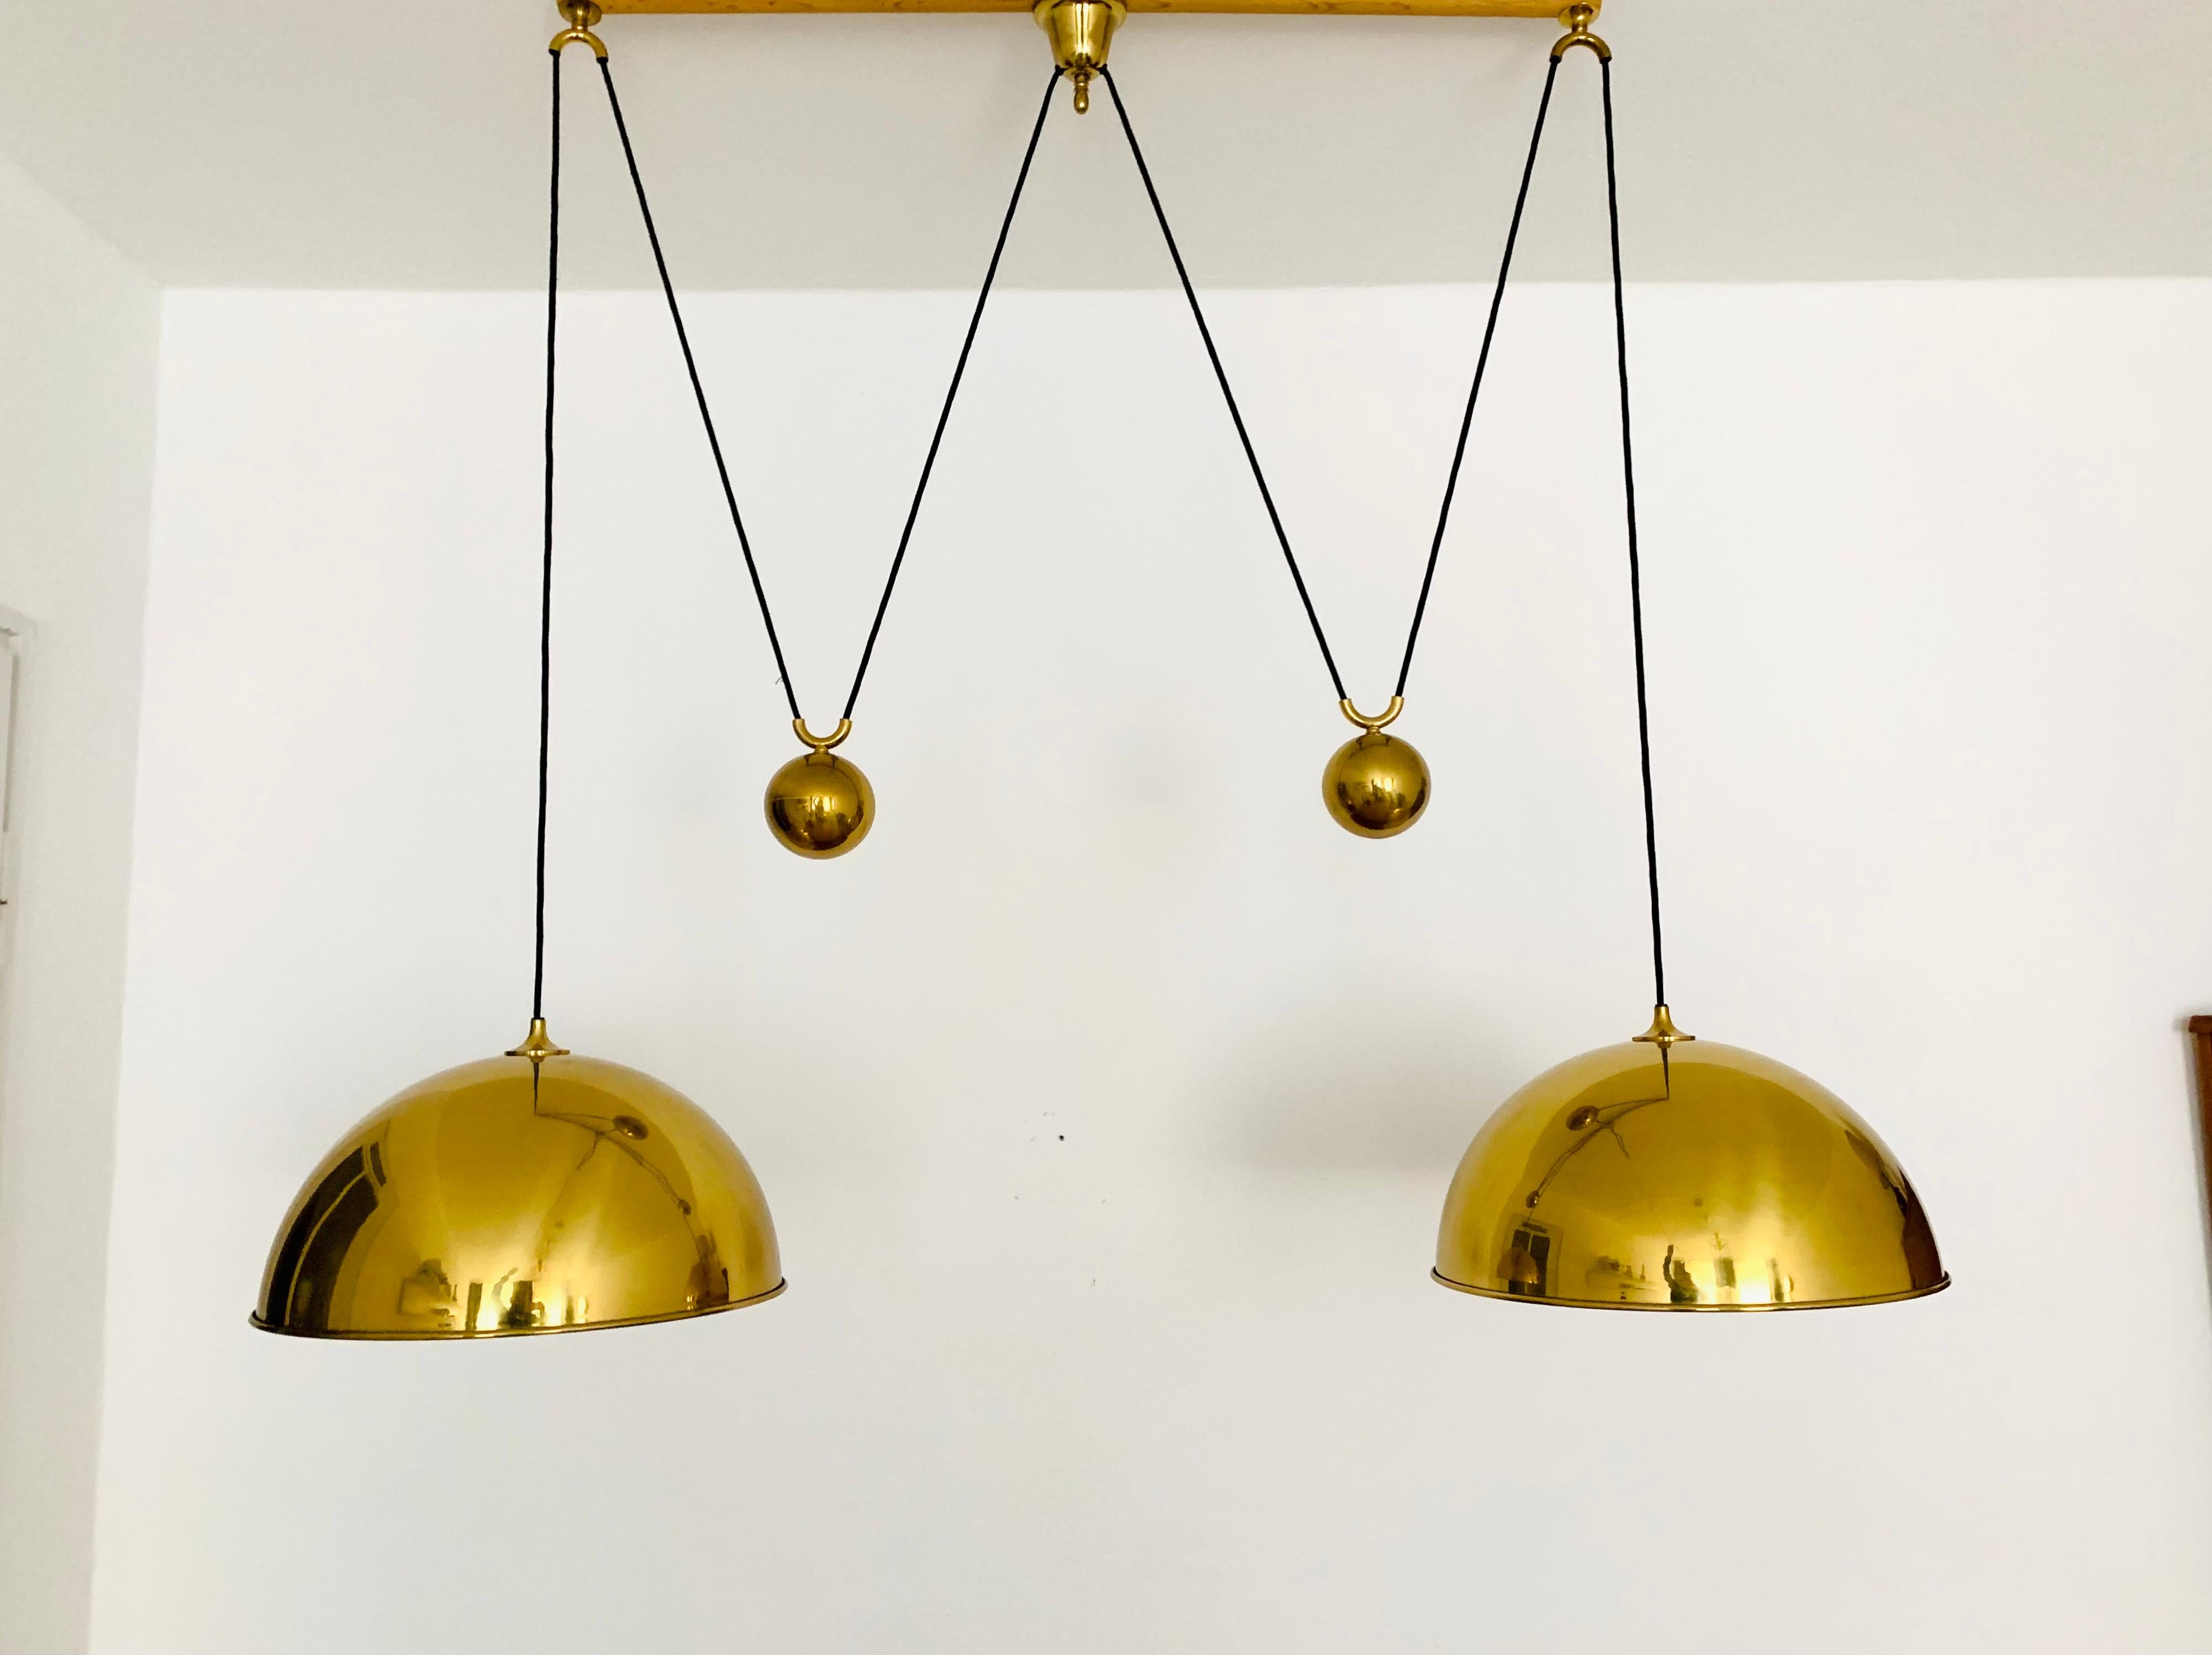 Very beautiful and rare double Posa44 brass ceiling lamp from the 1960s.
The lighting effect of the lamp is extremely beautiful.
The design and the very beautiful details create a very elegant and pleasant light.
The lamp creates a very cozy